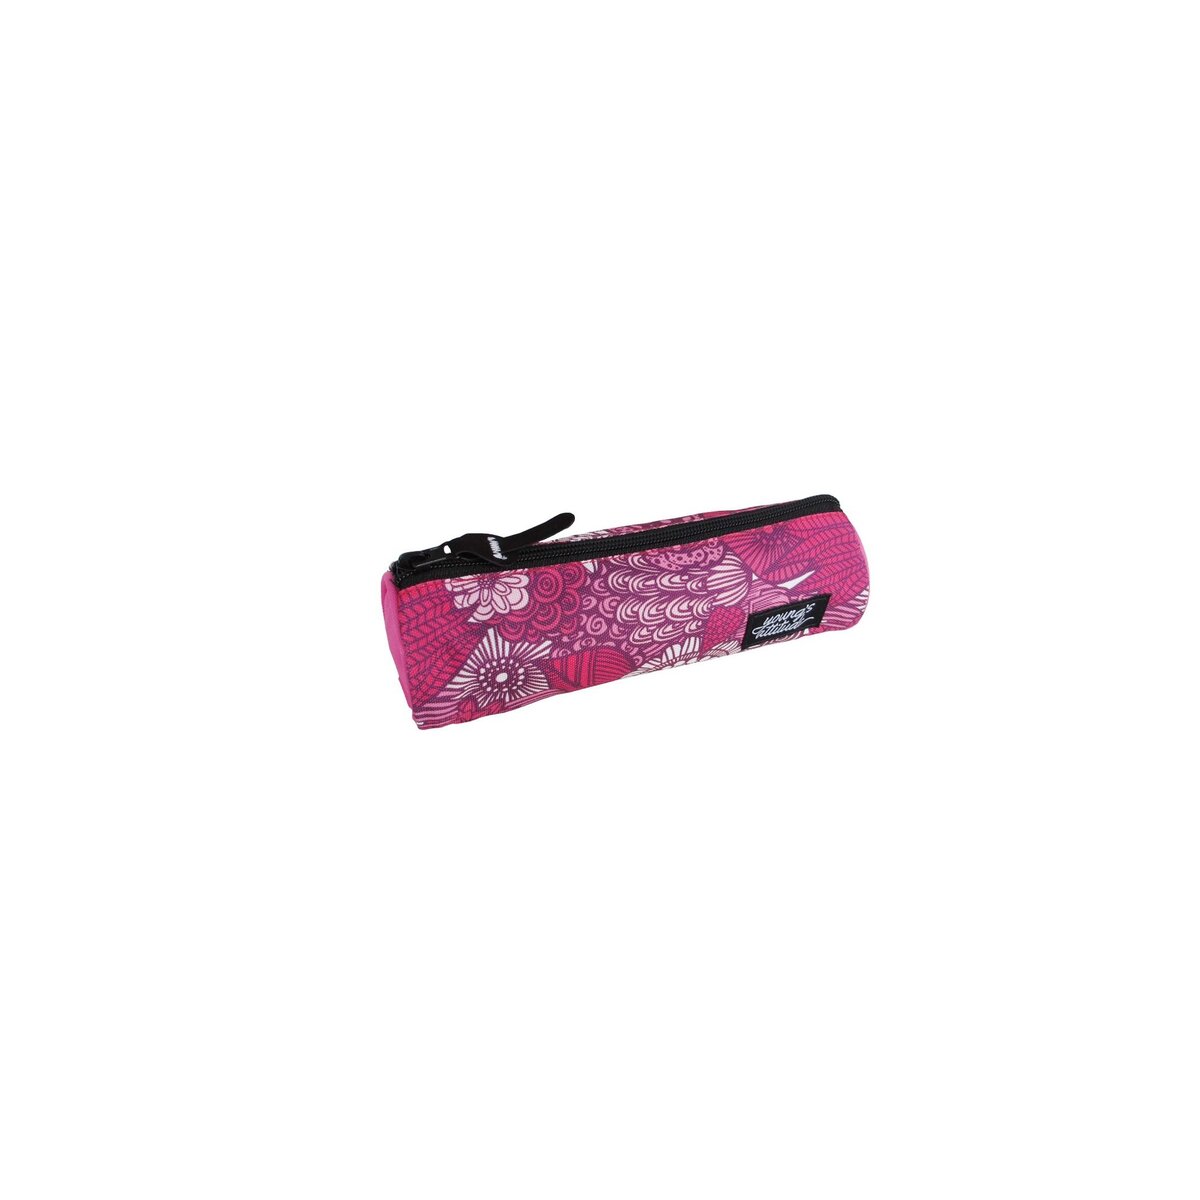 YOUNG ATTITUDE Trousse ronde rose